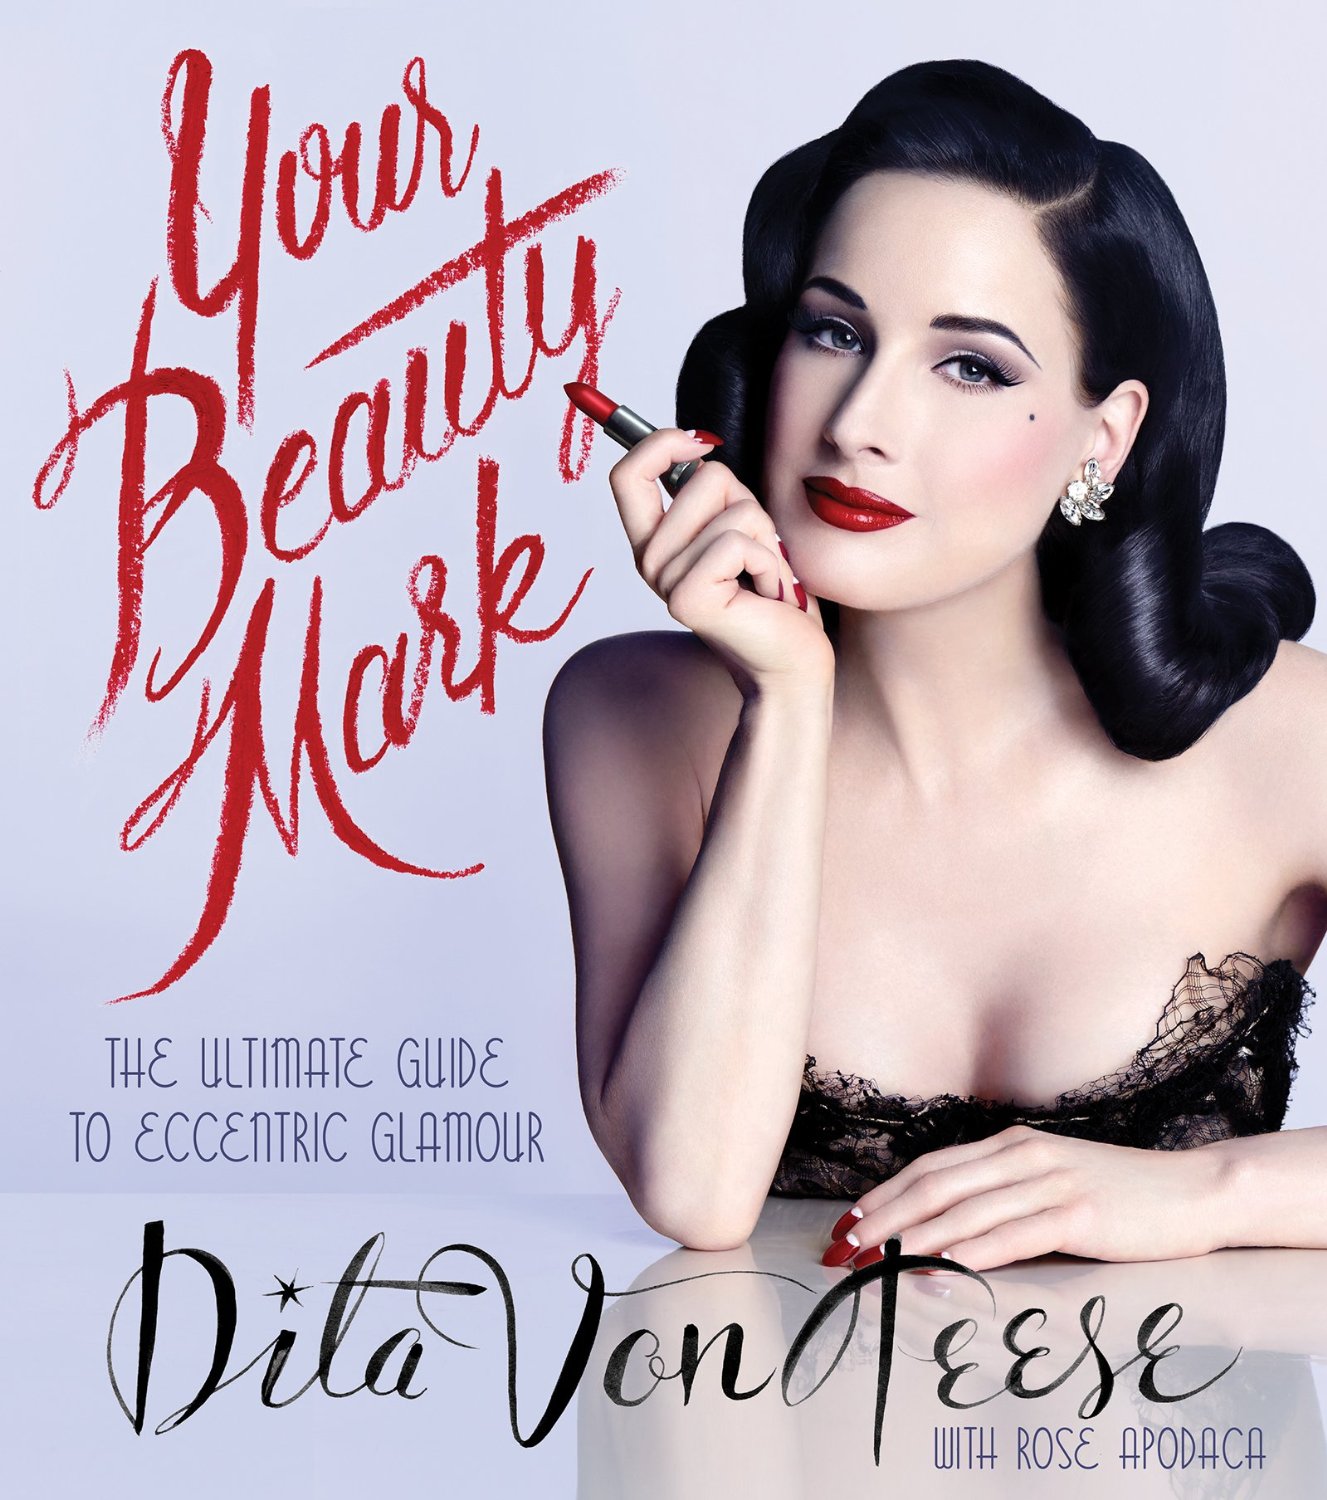 Your beauty mark book by dita von teese